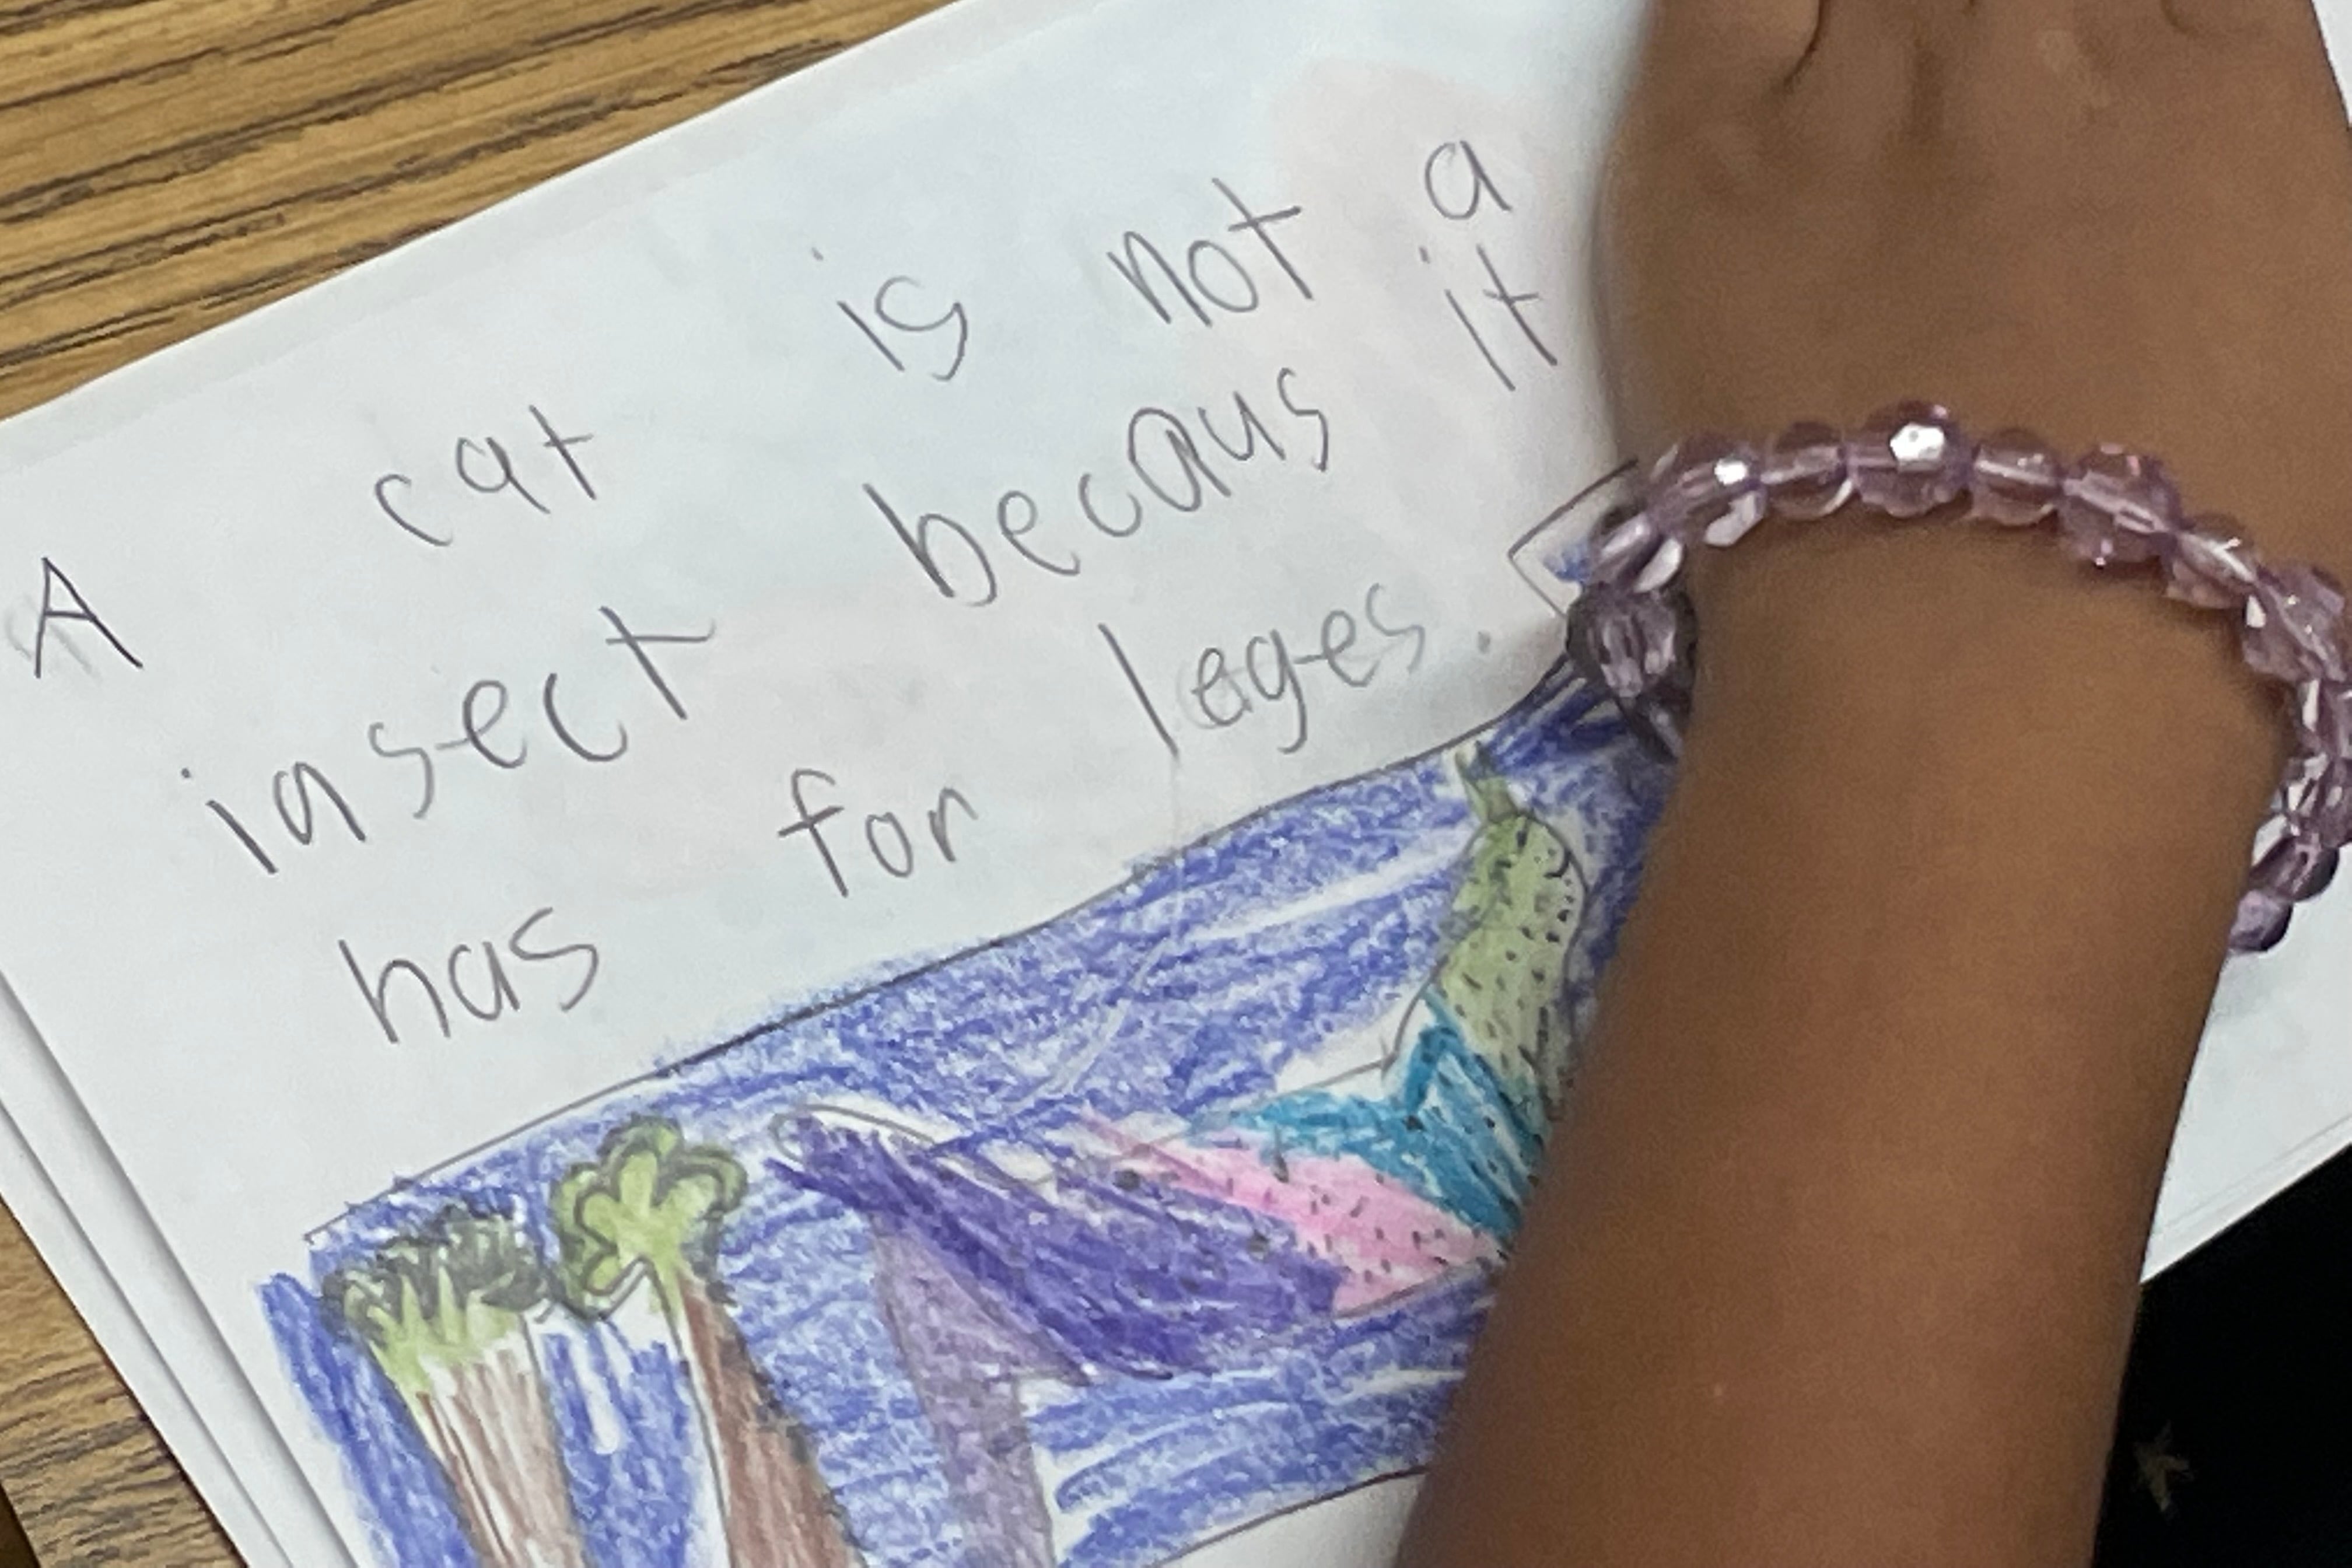 A students hand is shown alongside a passage written by the girl about why a cat is not an insect.